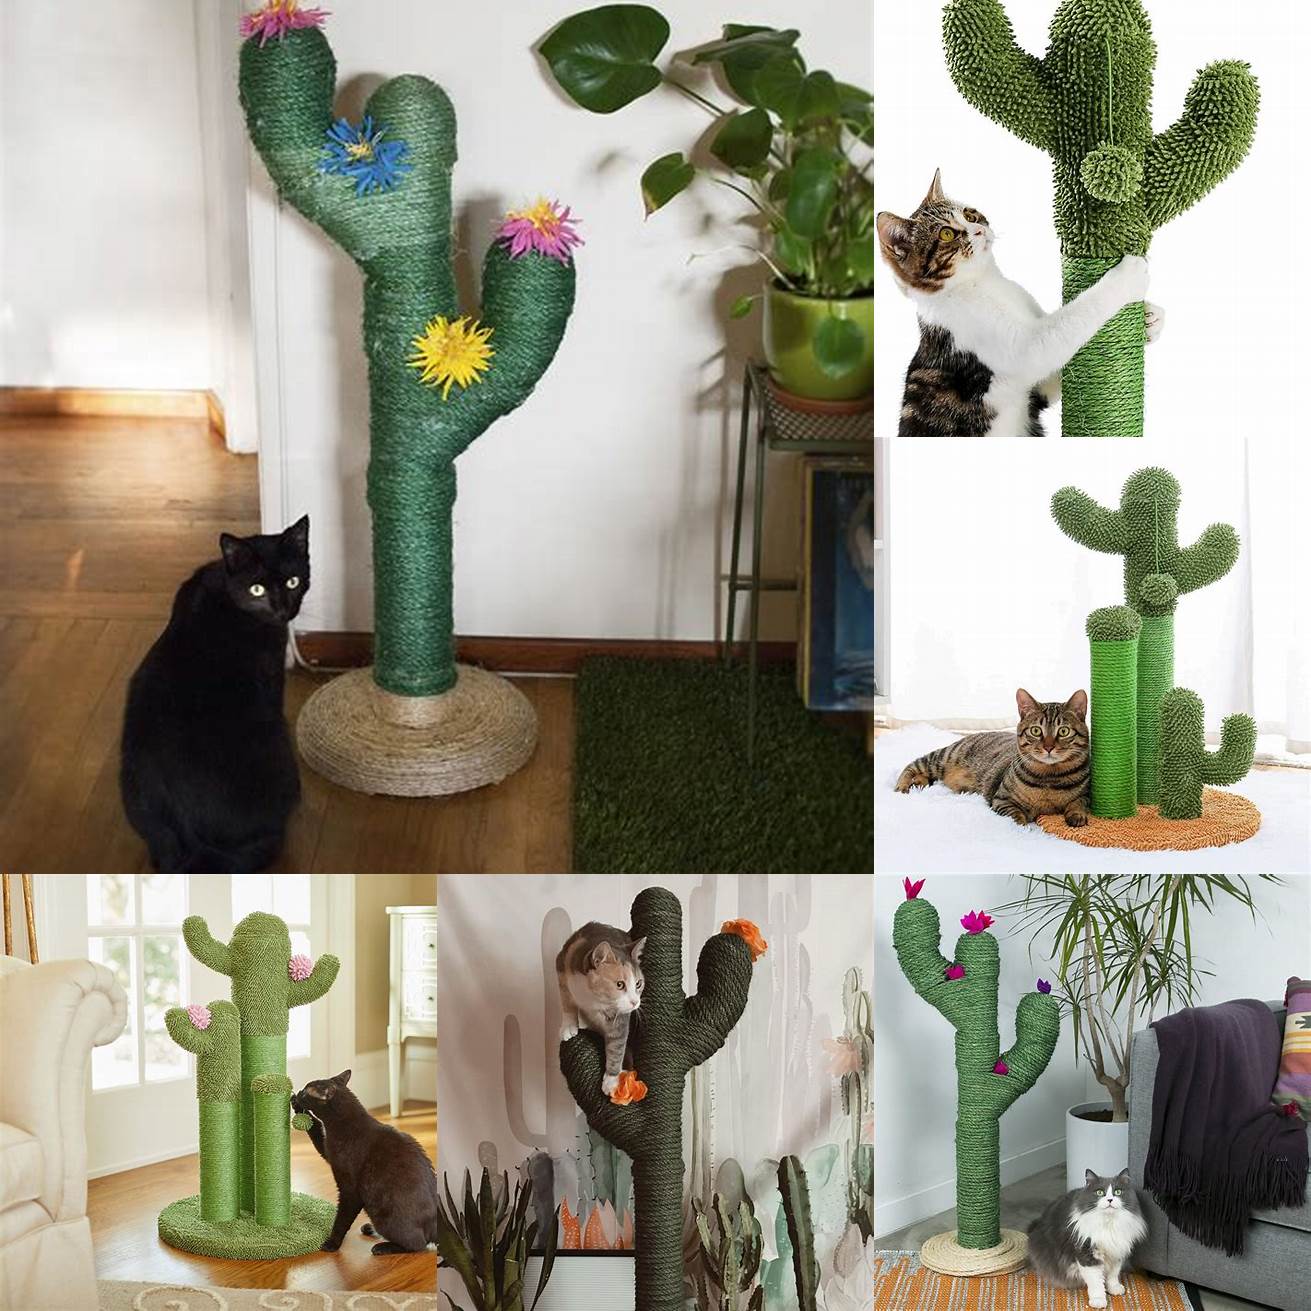 Make the Cactus Cat Scratching Post a statement piece by displaying it prominently in your living room or entryway